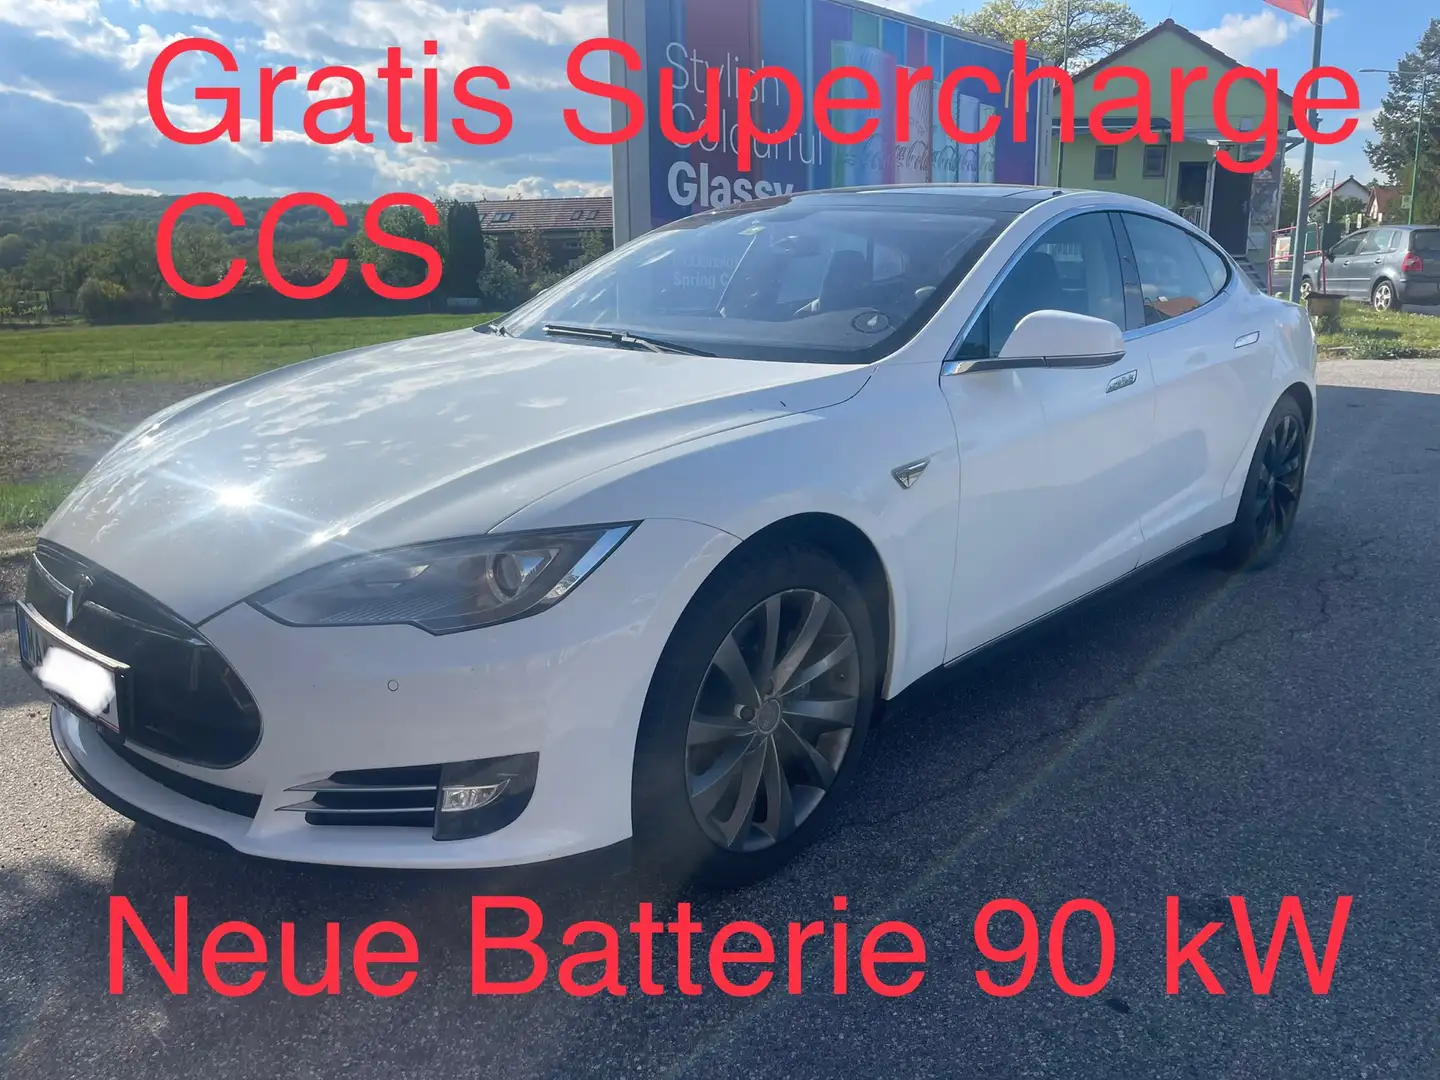 Tesla Model S S90, neue batterie, Free Supercharger White - 1